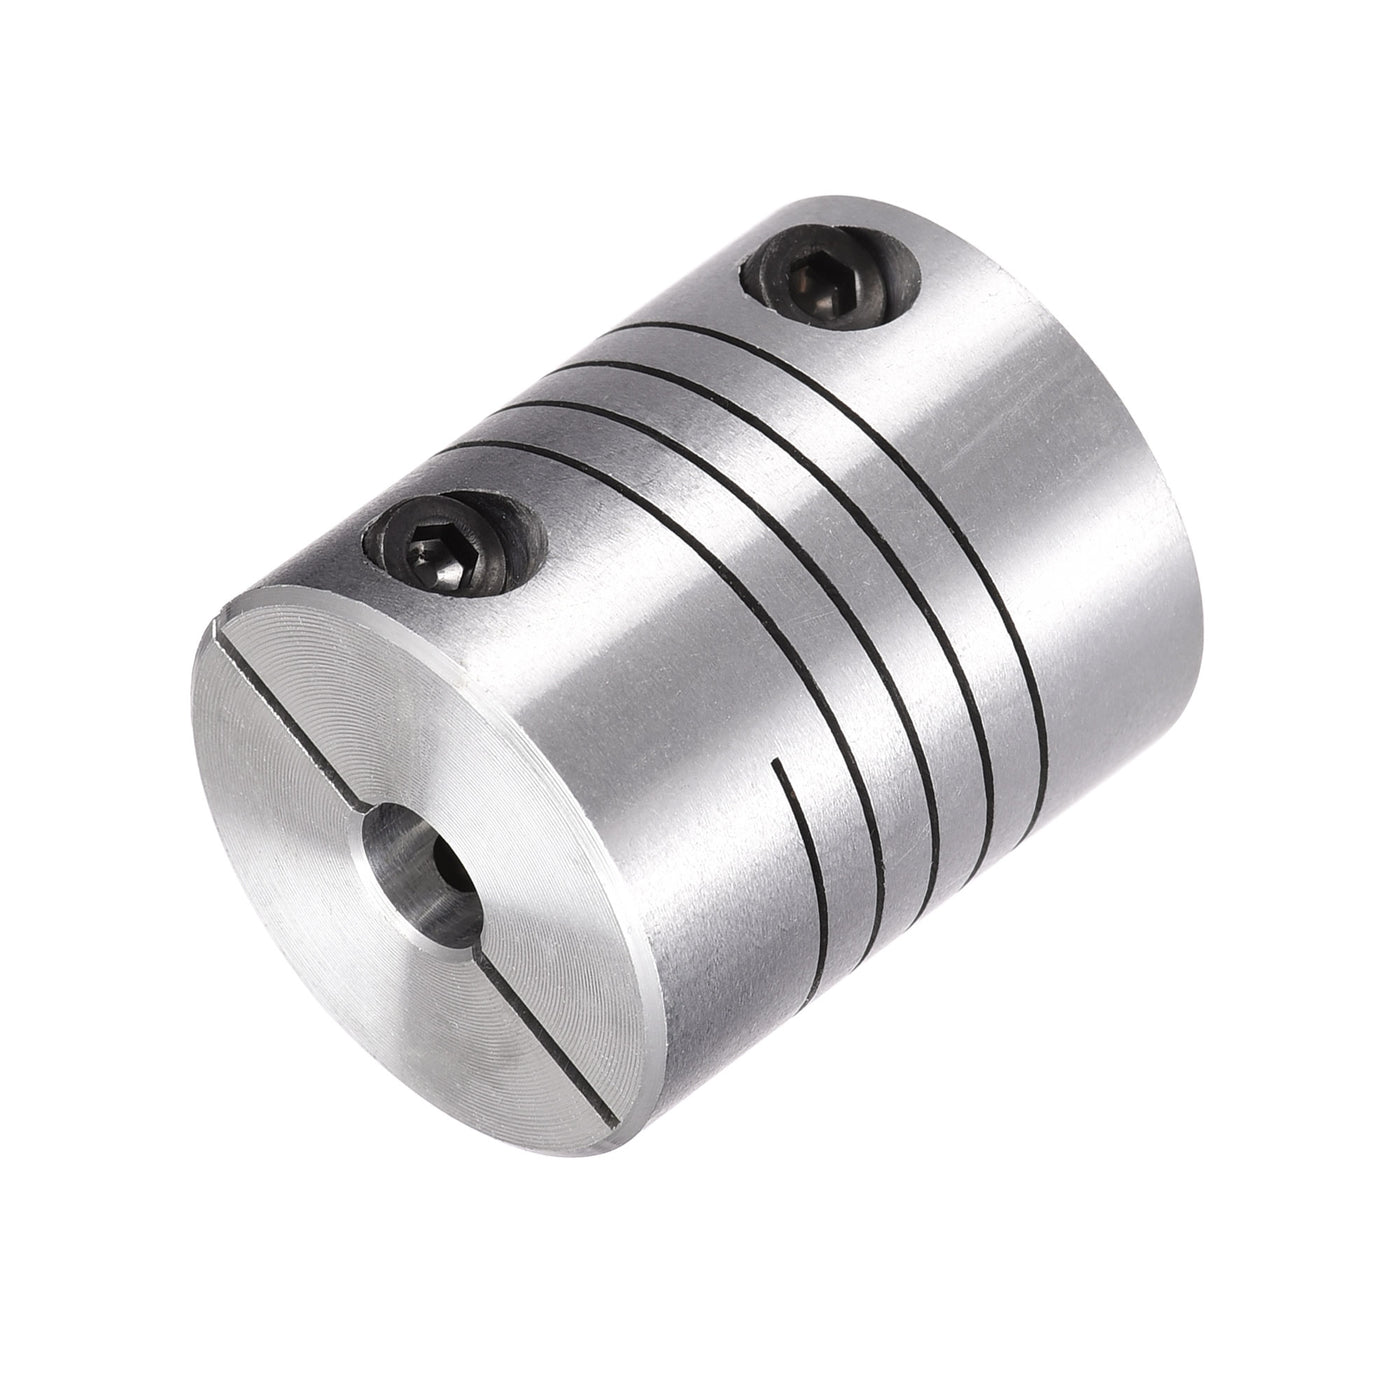 uxcell Uxcell 2PCS Motor Shaft 6mm to 6.35mm Helical Beam Coupler Coupling 20mm Dia 25mm Long